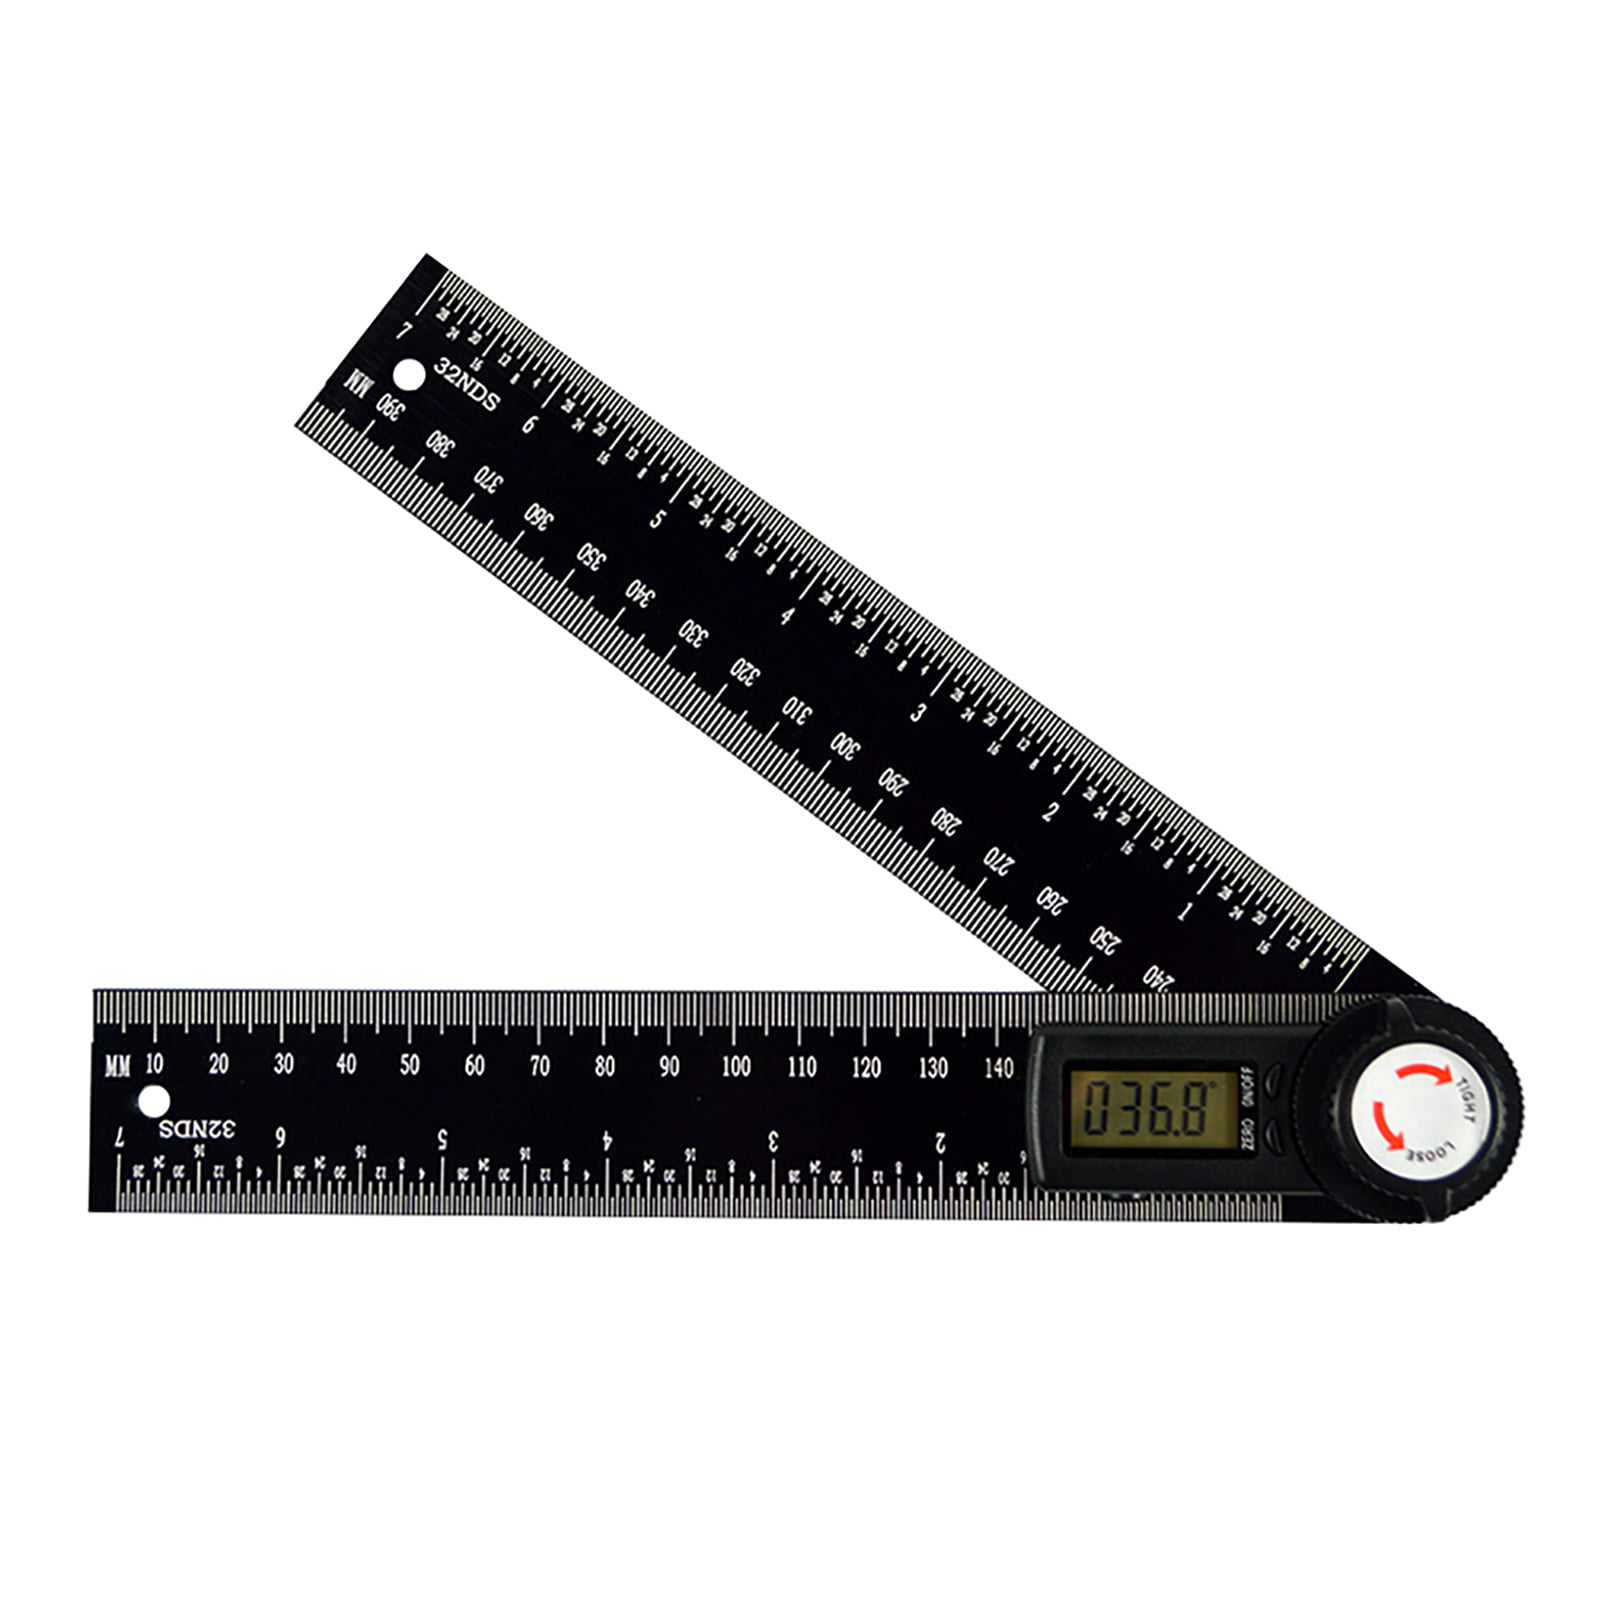 Details about   Electronic LCD Digital Display Protractor Angle Ruler 0-360° Gauge Measure Meter 